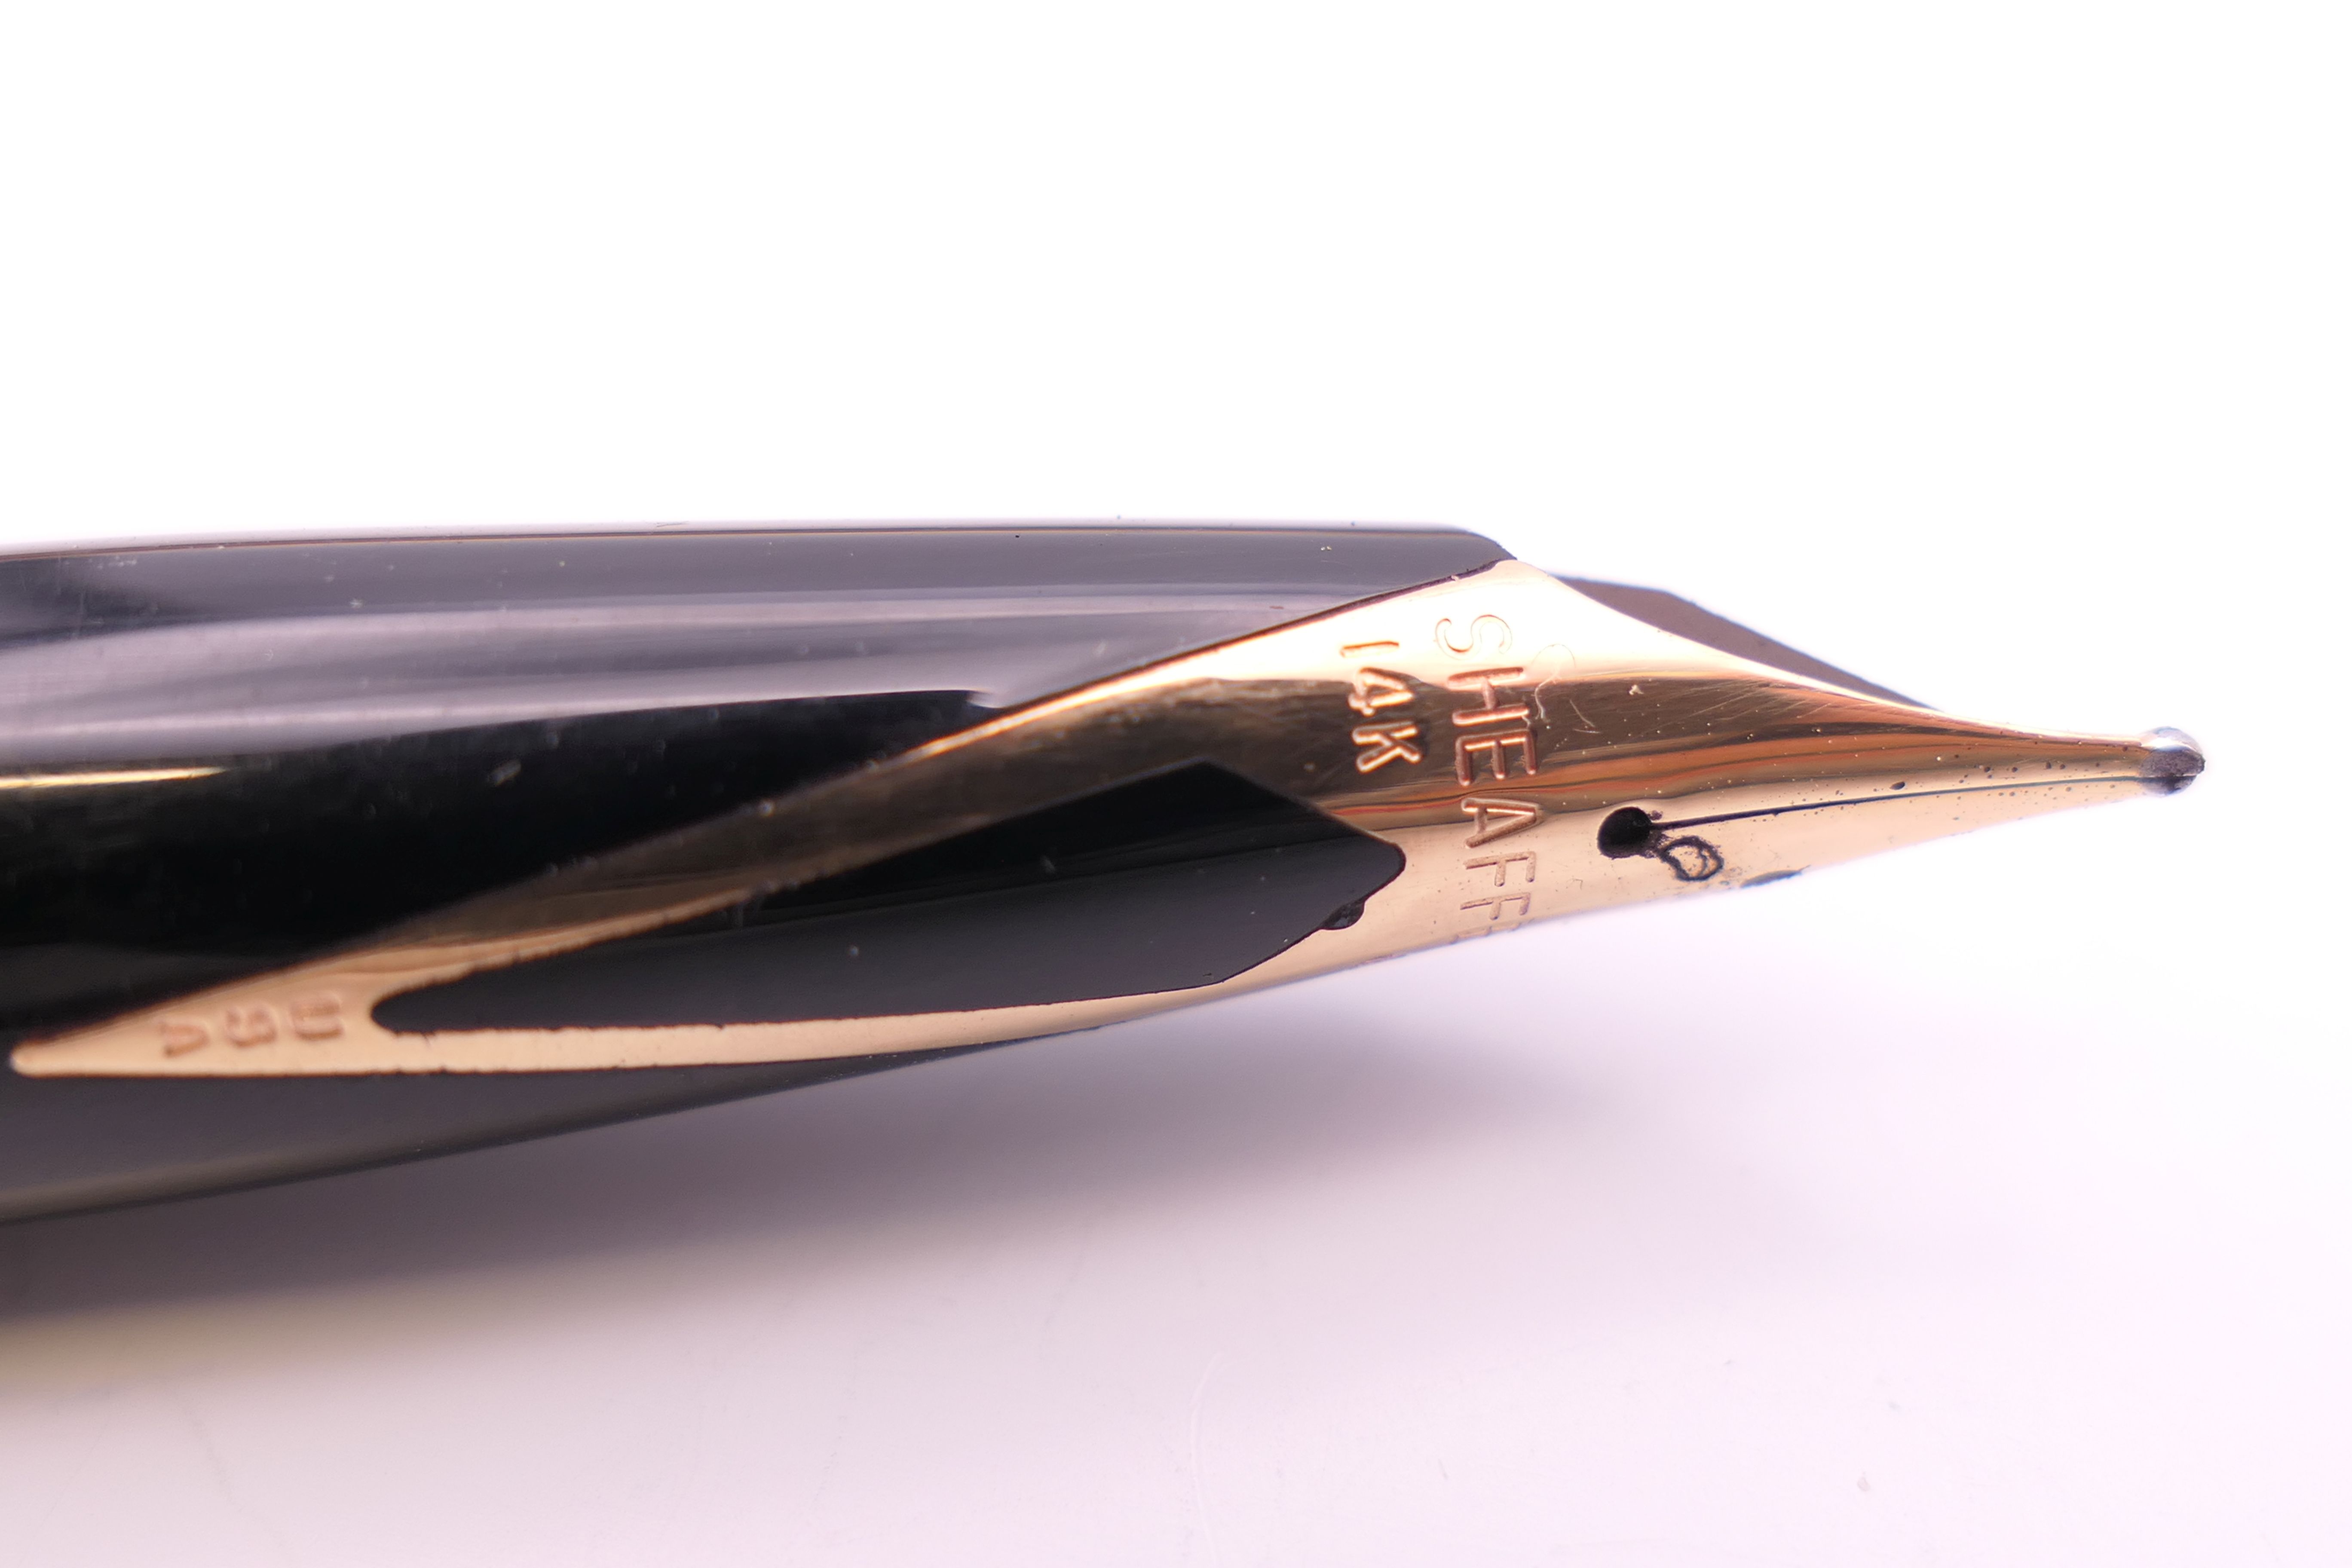 A Sheaffer fountain pen with 14 K gold nib and a Shaeffer ballpoint pen. - Image 5 of 9